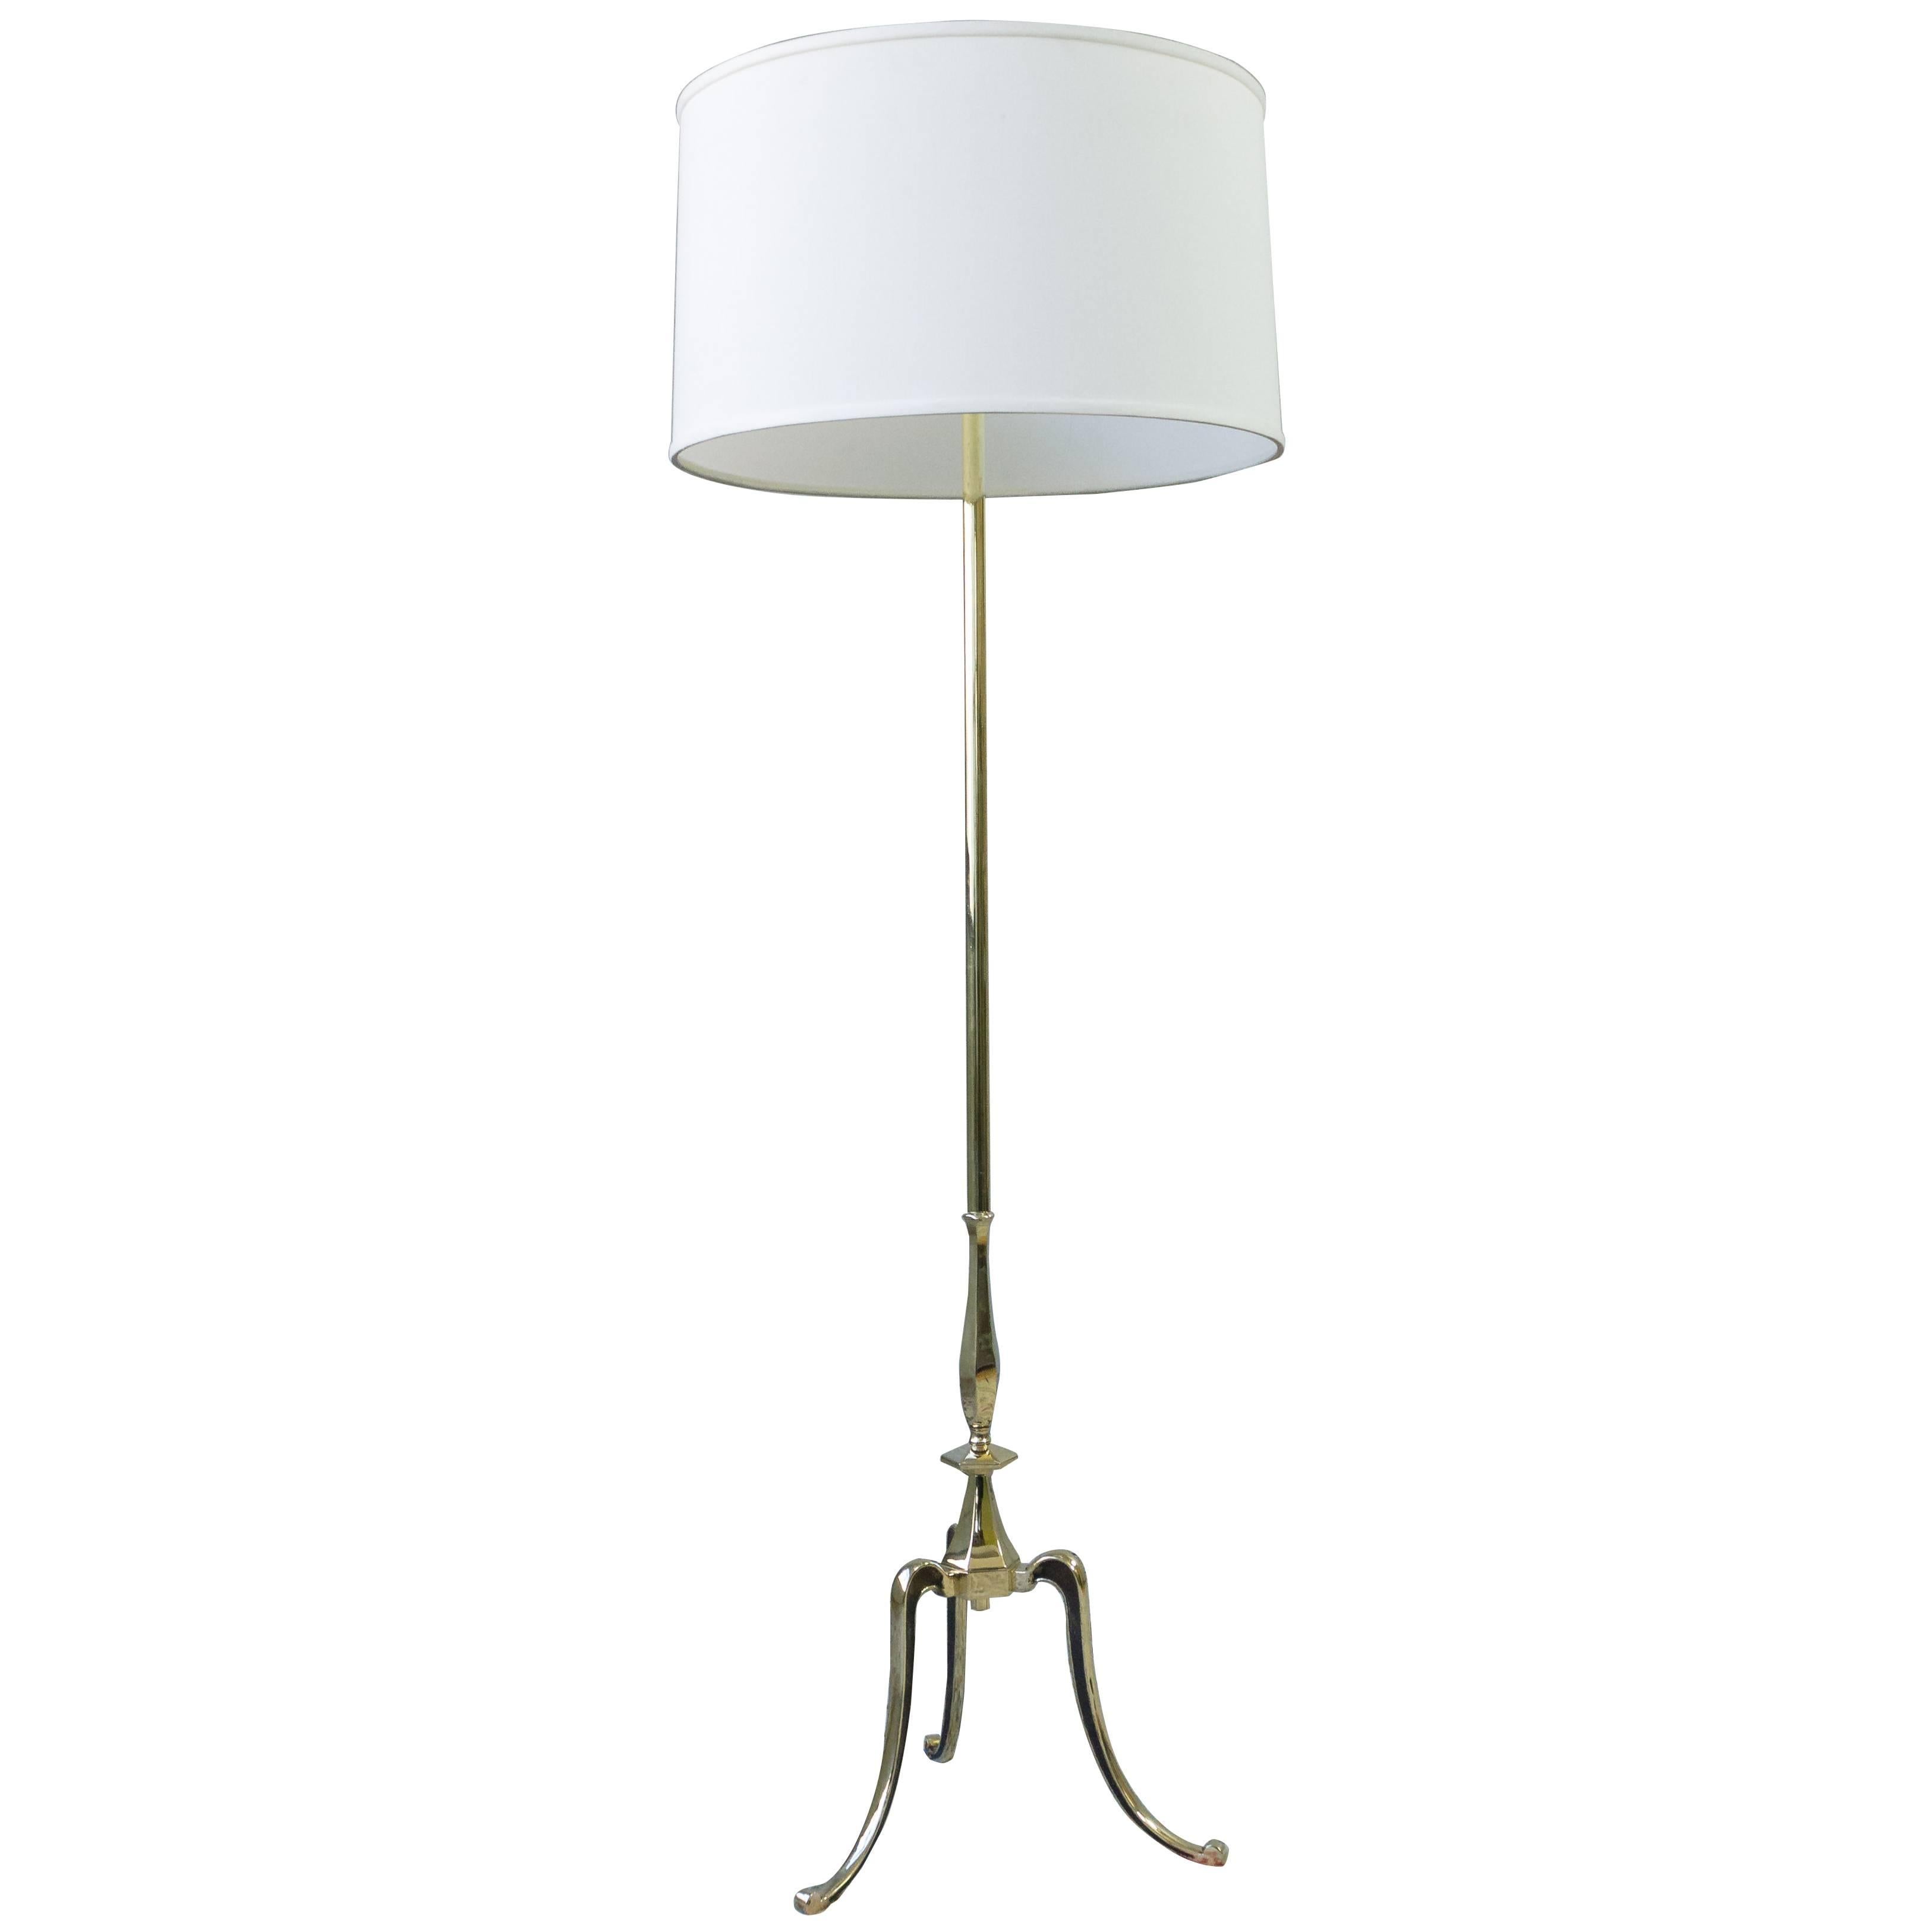 1950s French Floor Lamp with Tripod Base in Polished Brass